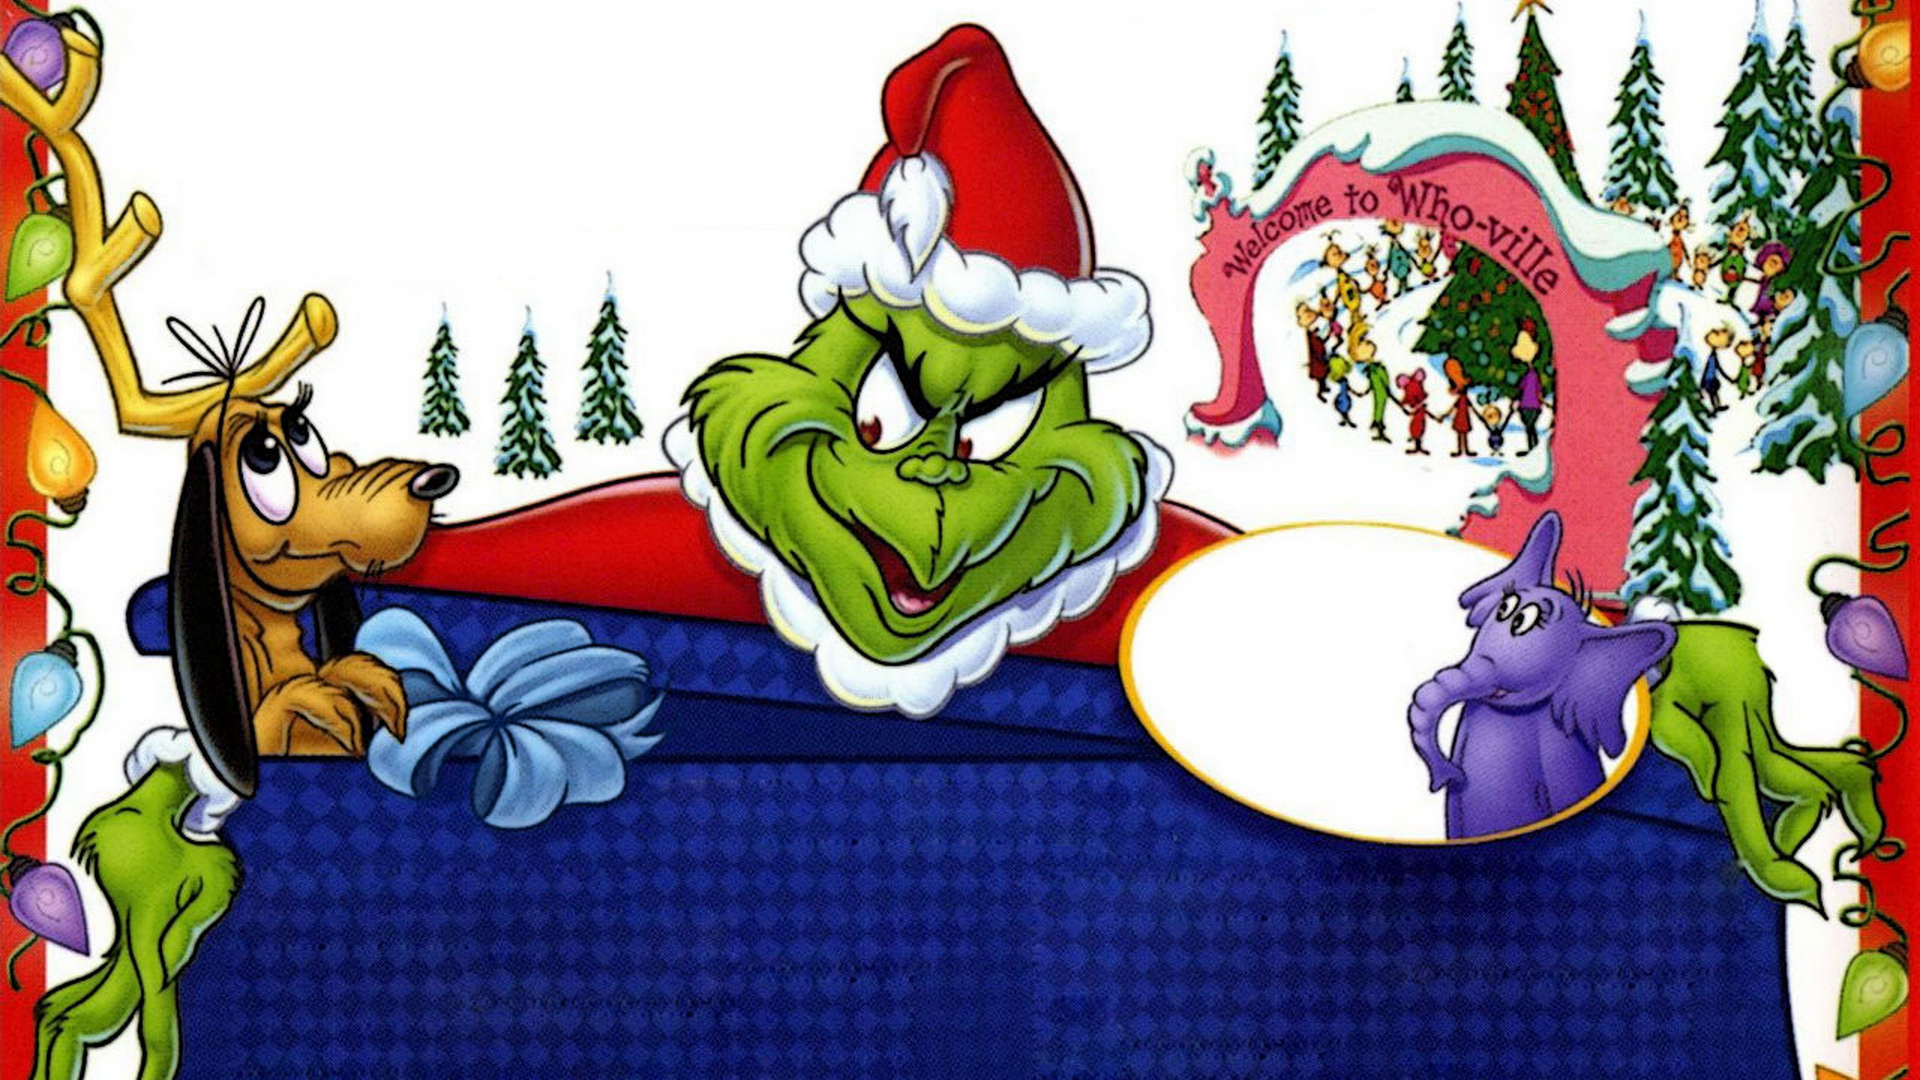 1920x1080 How the Grinch Stole Christmas Wallpaper HD Desktop Wallpapers.